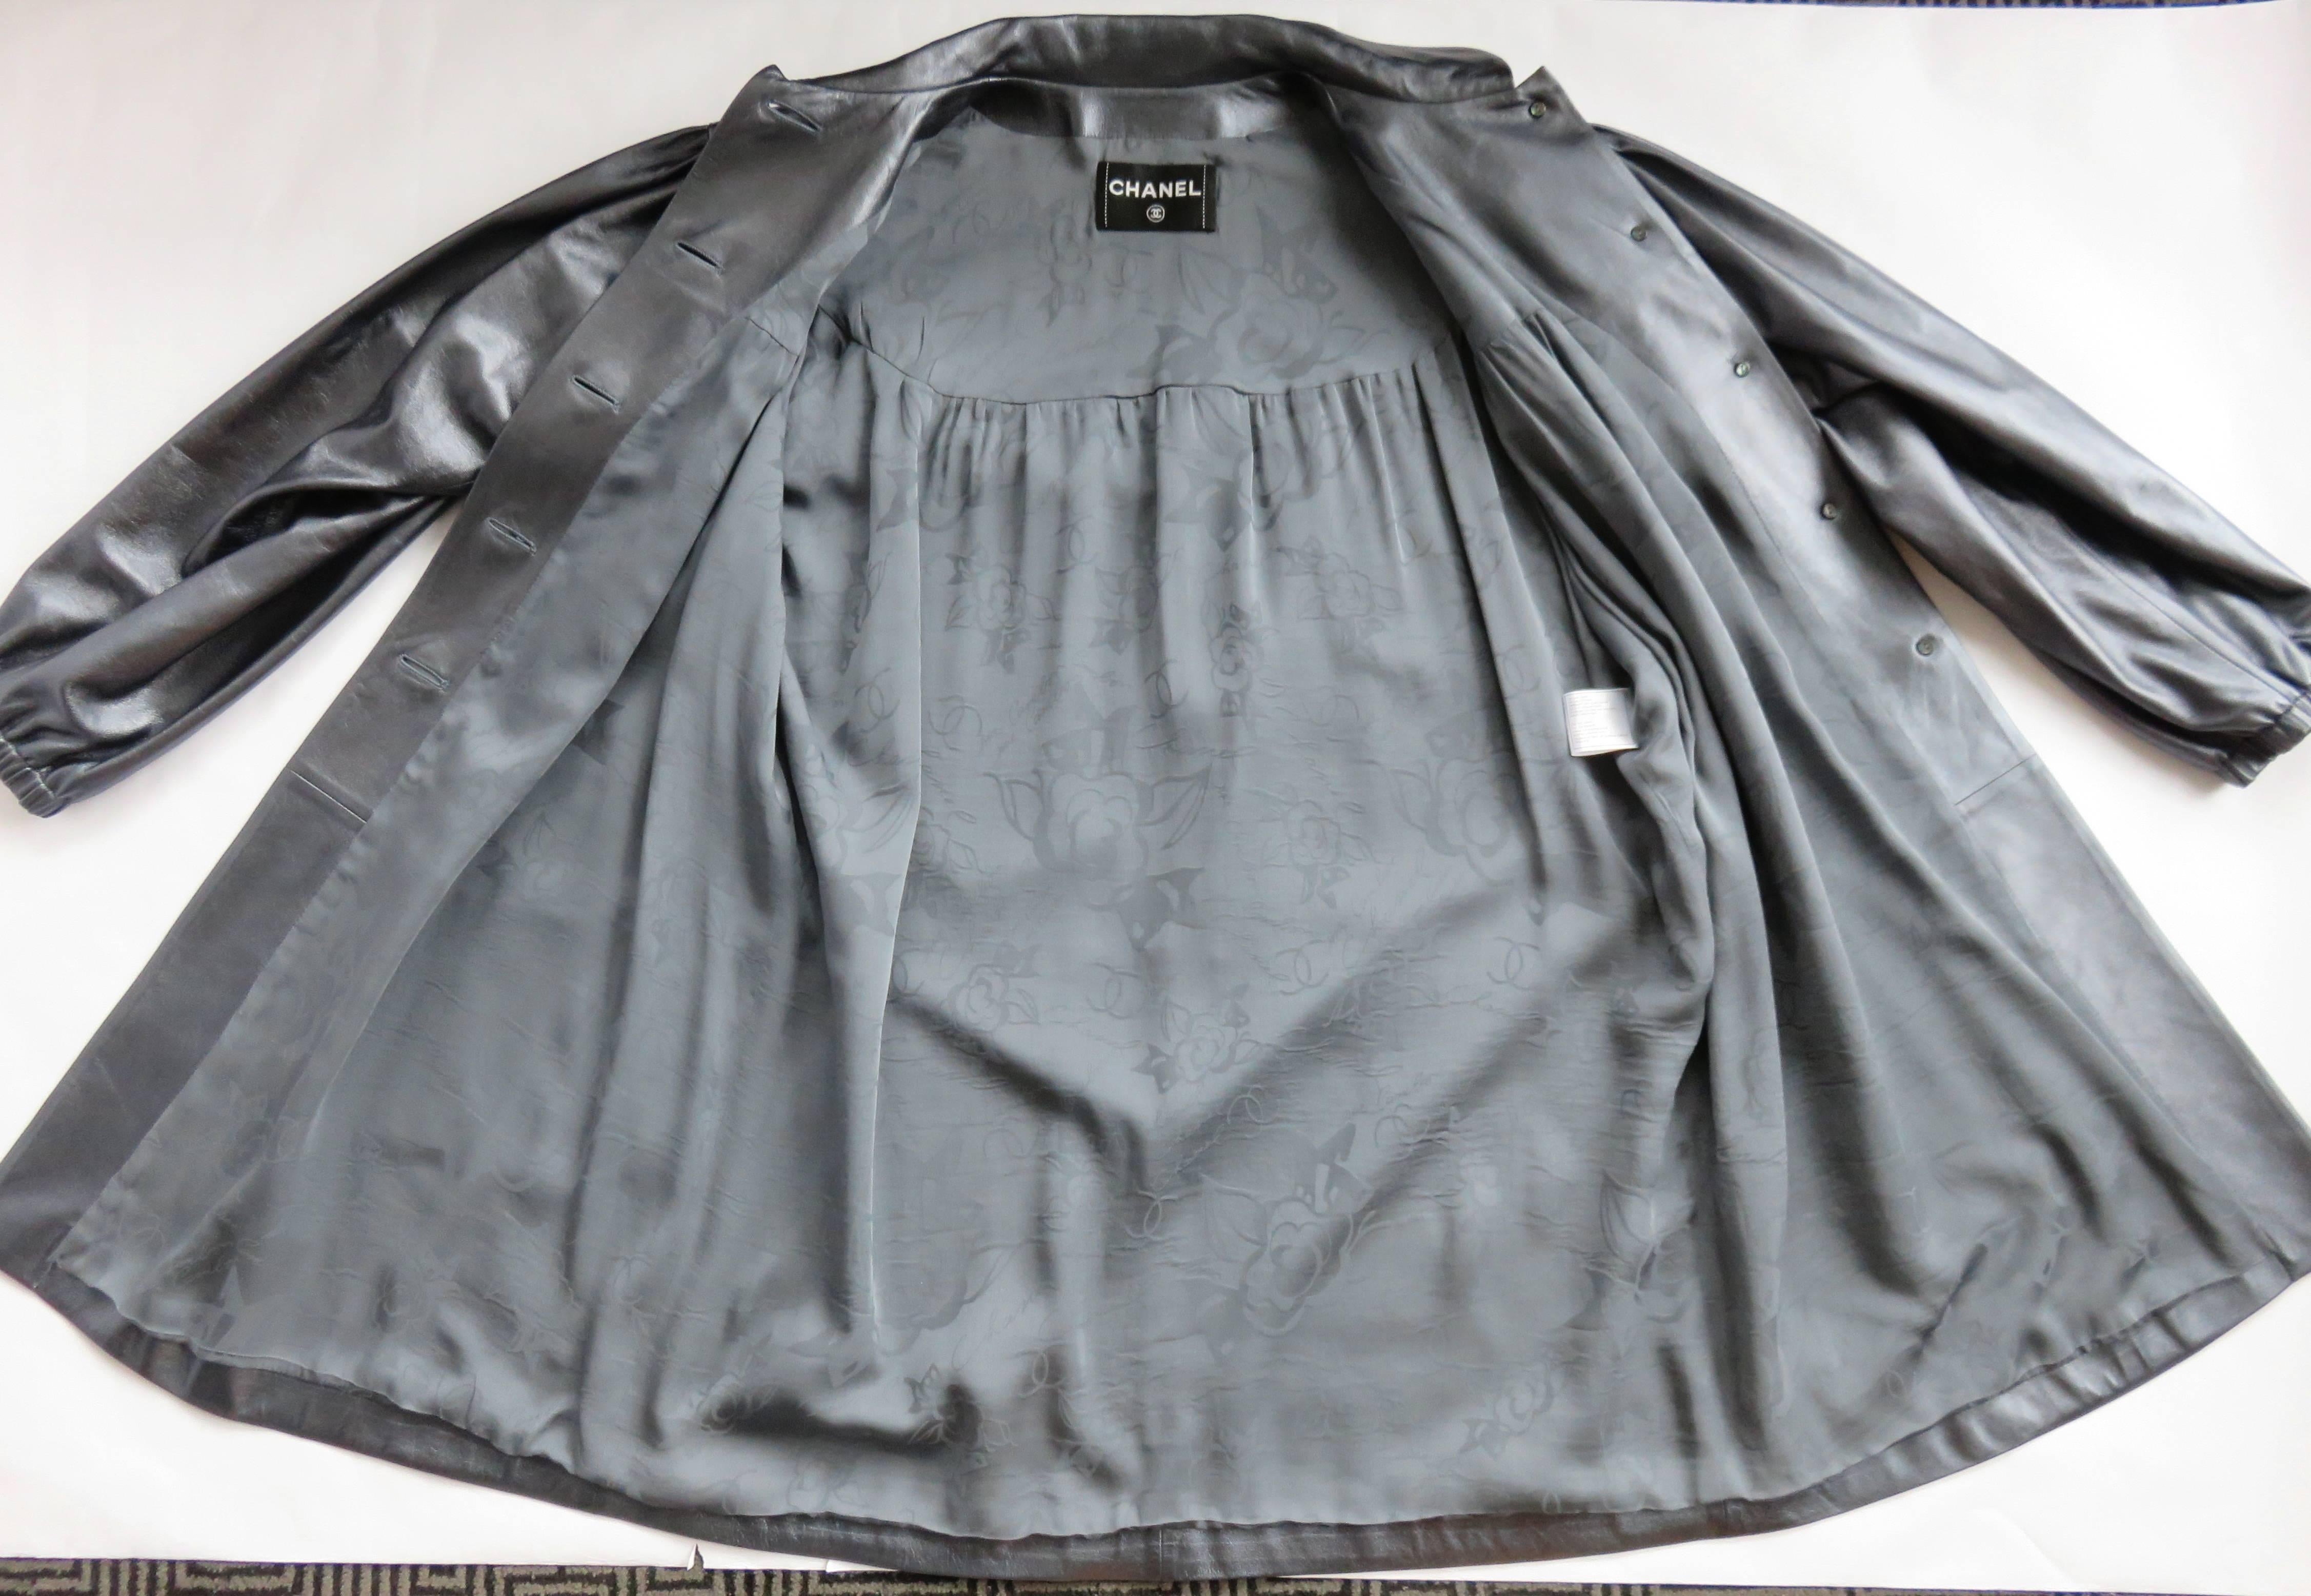 CHANEL PARIS Pewter lambskin leather coat - worn once For Sale 2